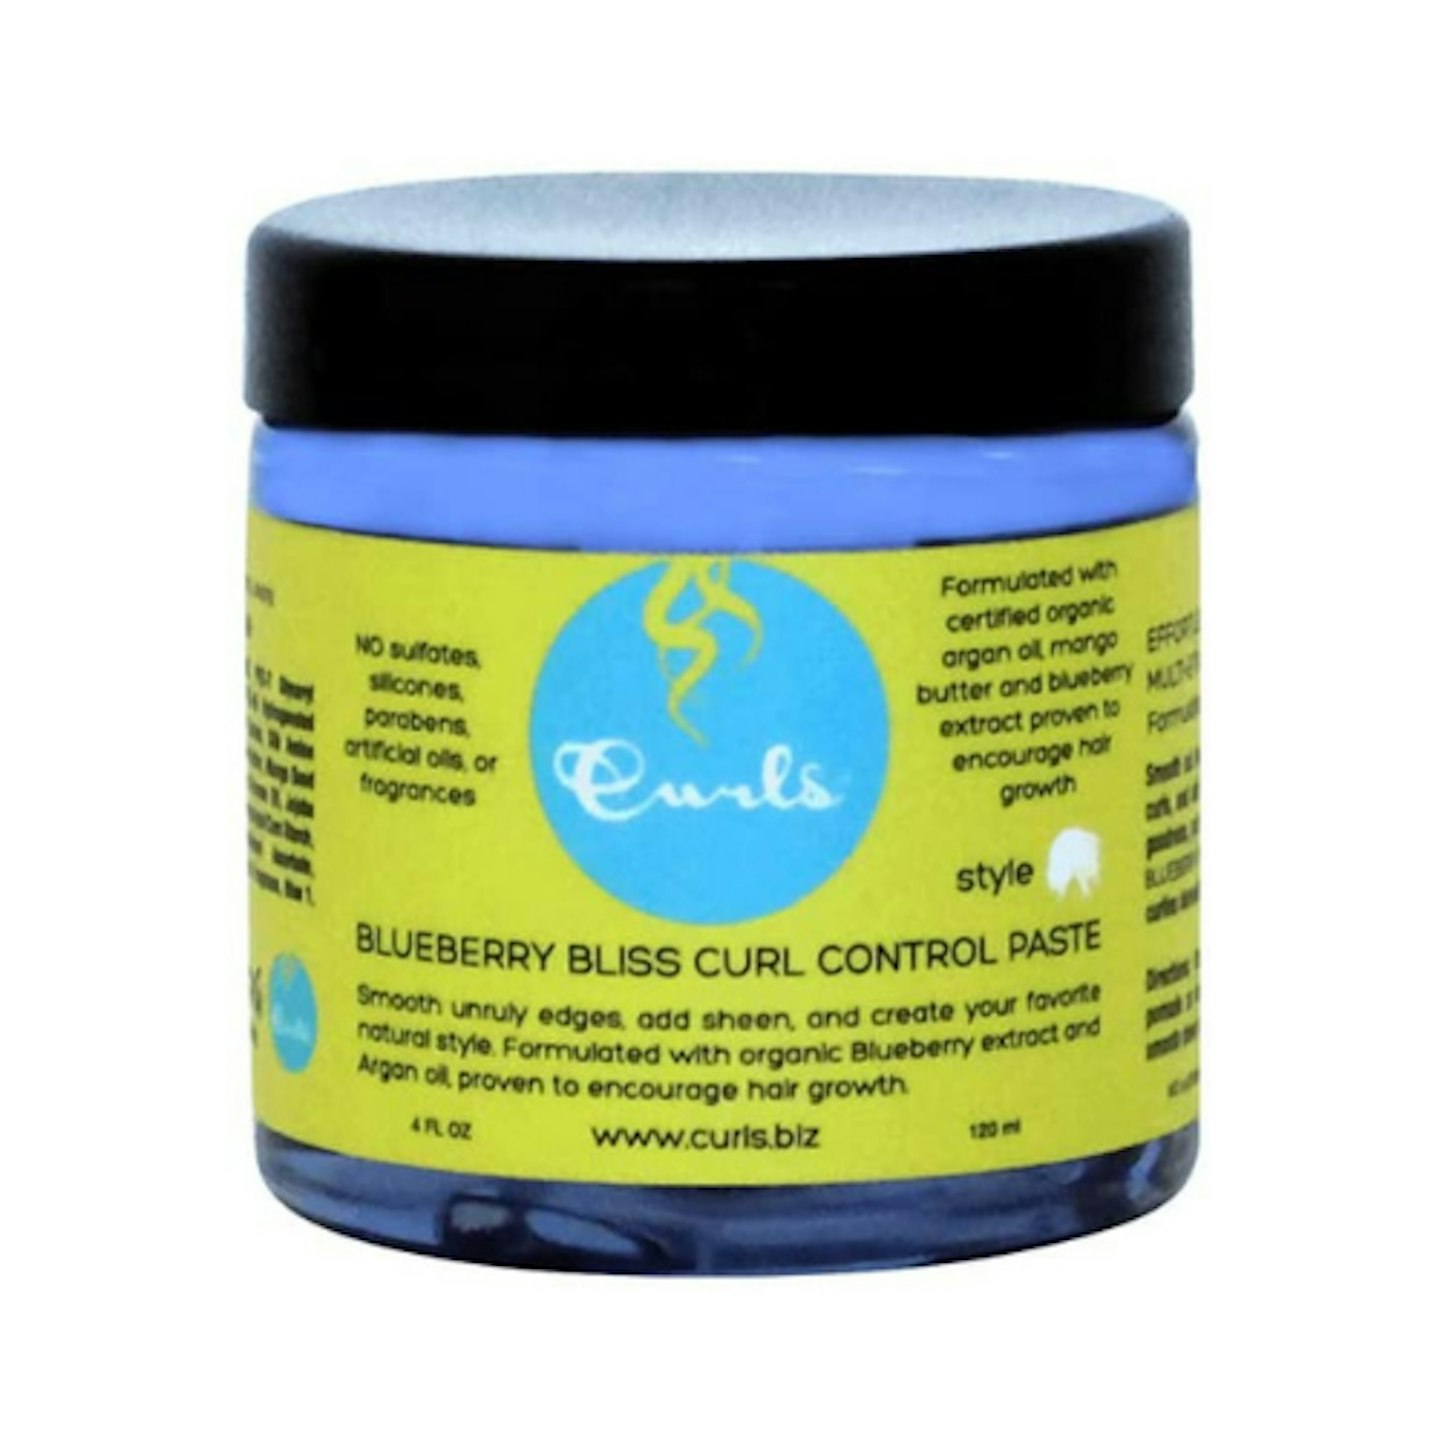 Curls Blueberry Bliss Curl Control Paste on white background